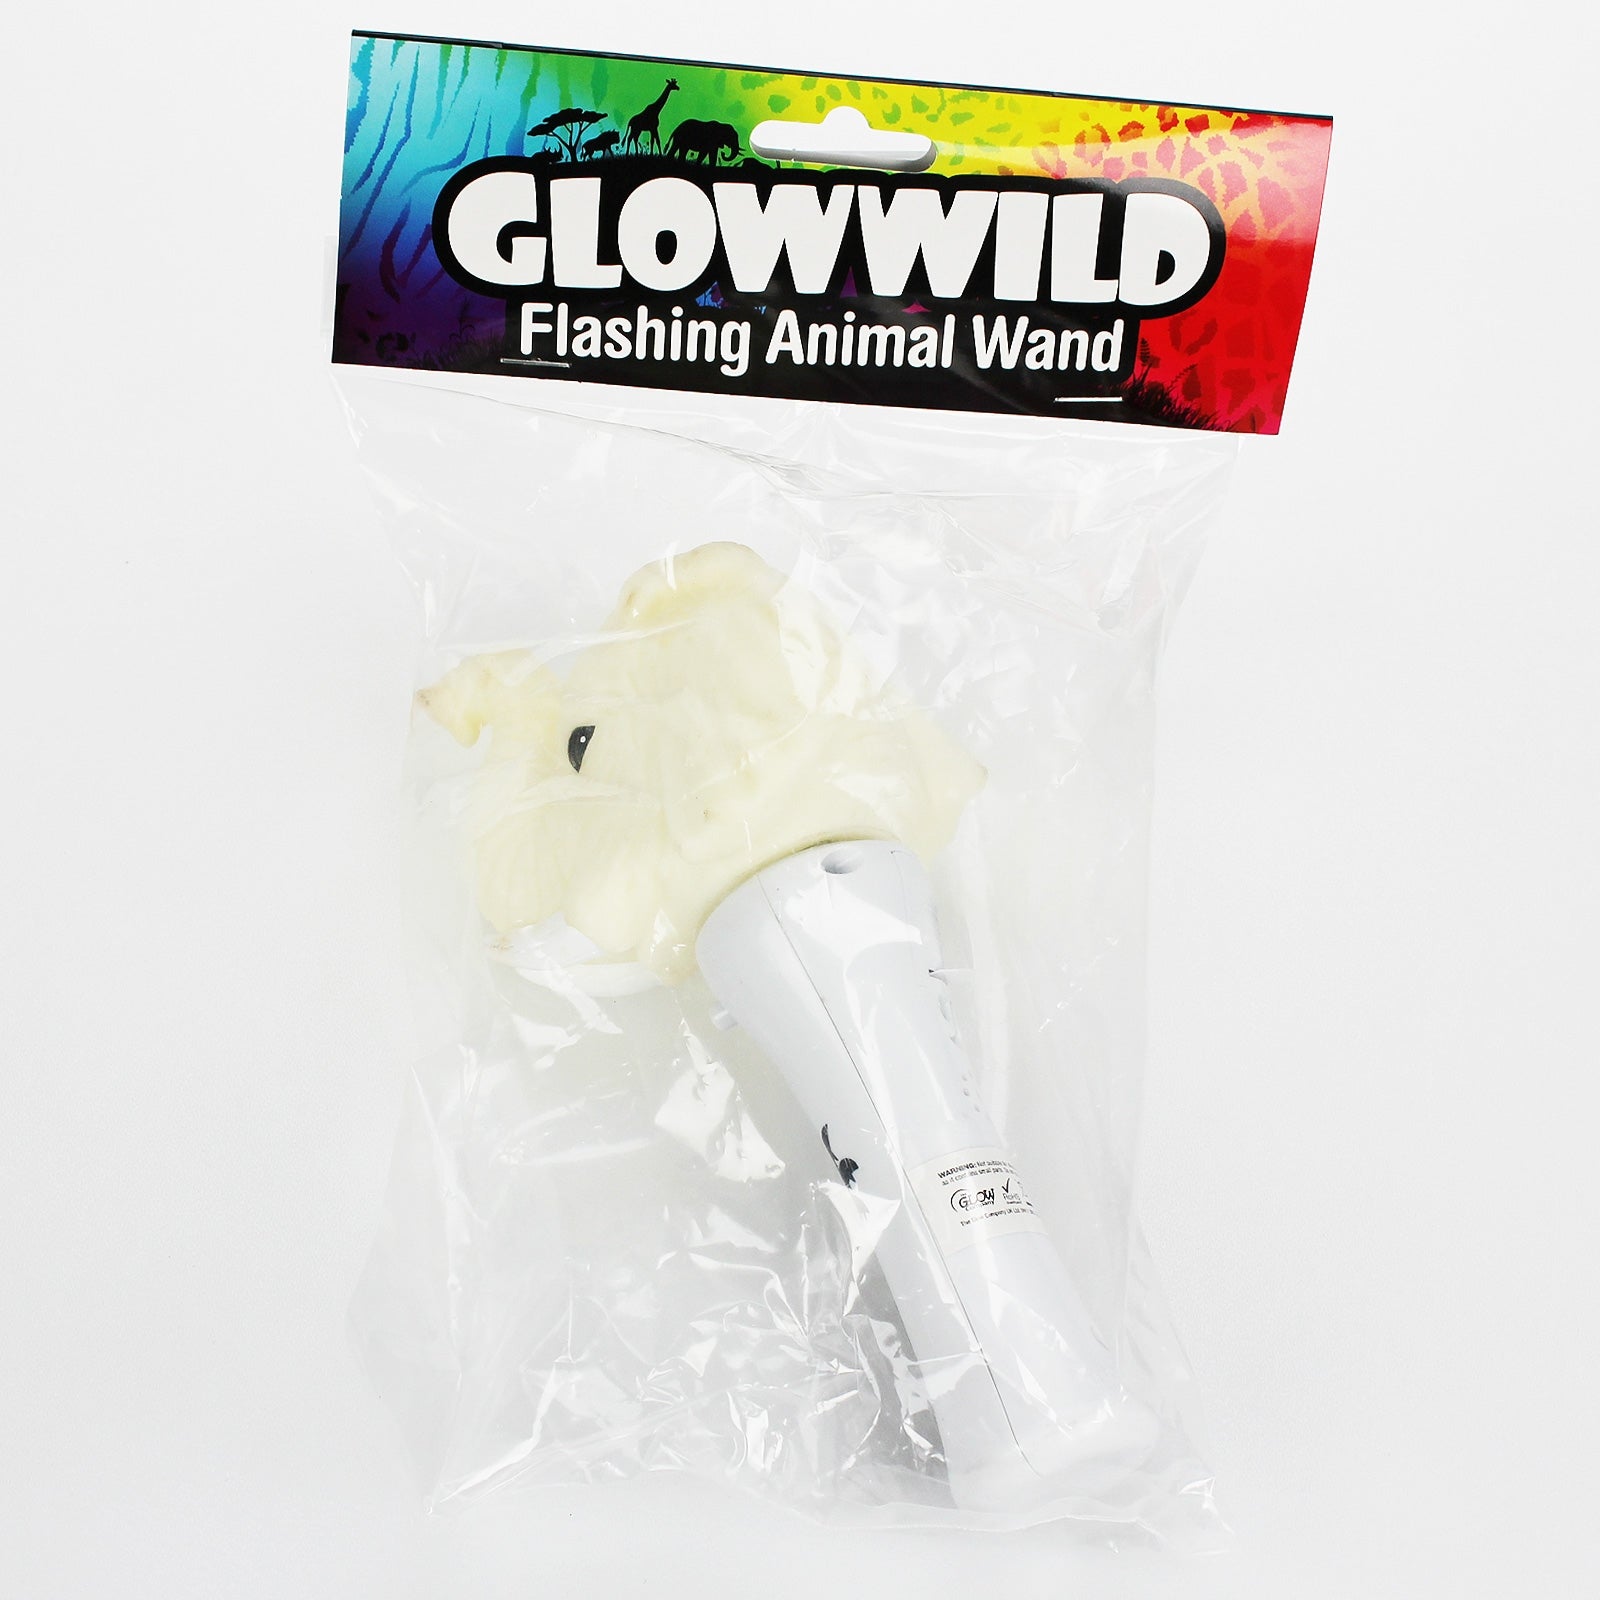 Elephant Mini Light Up Animal Wand 7", At 7" long this flashing elephant wand is just the right size for small hands and packed with multi coloured LEDs it lights up in a dazzling light show! With a simple on/off function, this Glow Wild mini elephant wand shines through a mesmerising colour change light show shining through the head and trunk of the white elephant wand. With batteries included and ready to go, animal lovers will love this sweet elephant that's ideal for animal themed parties and events. El